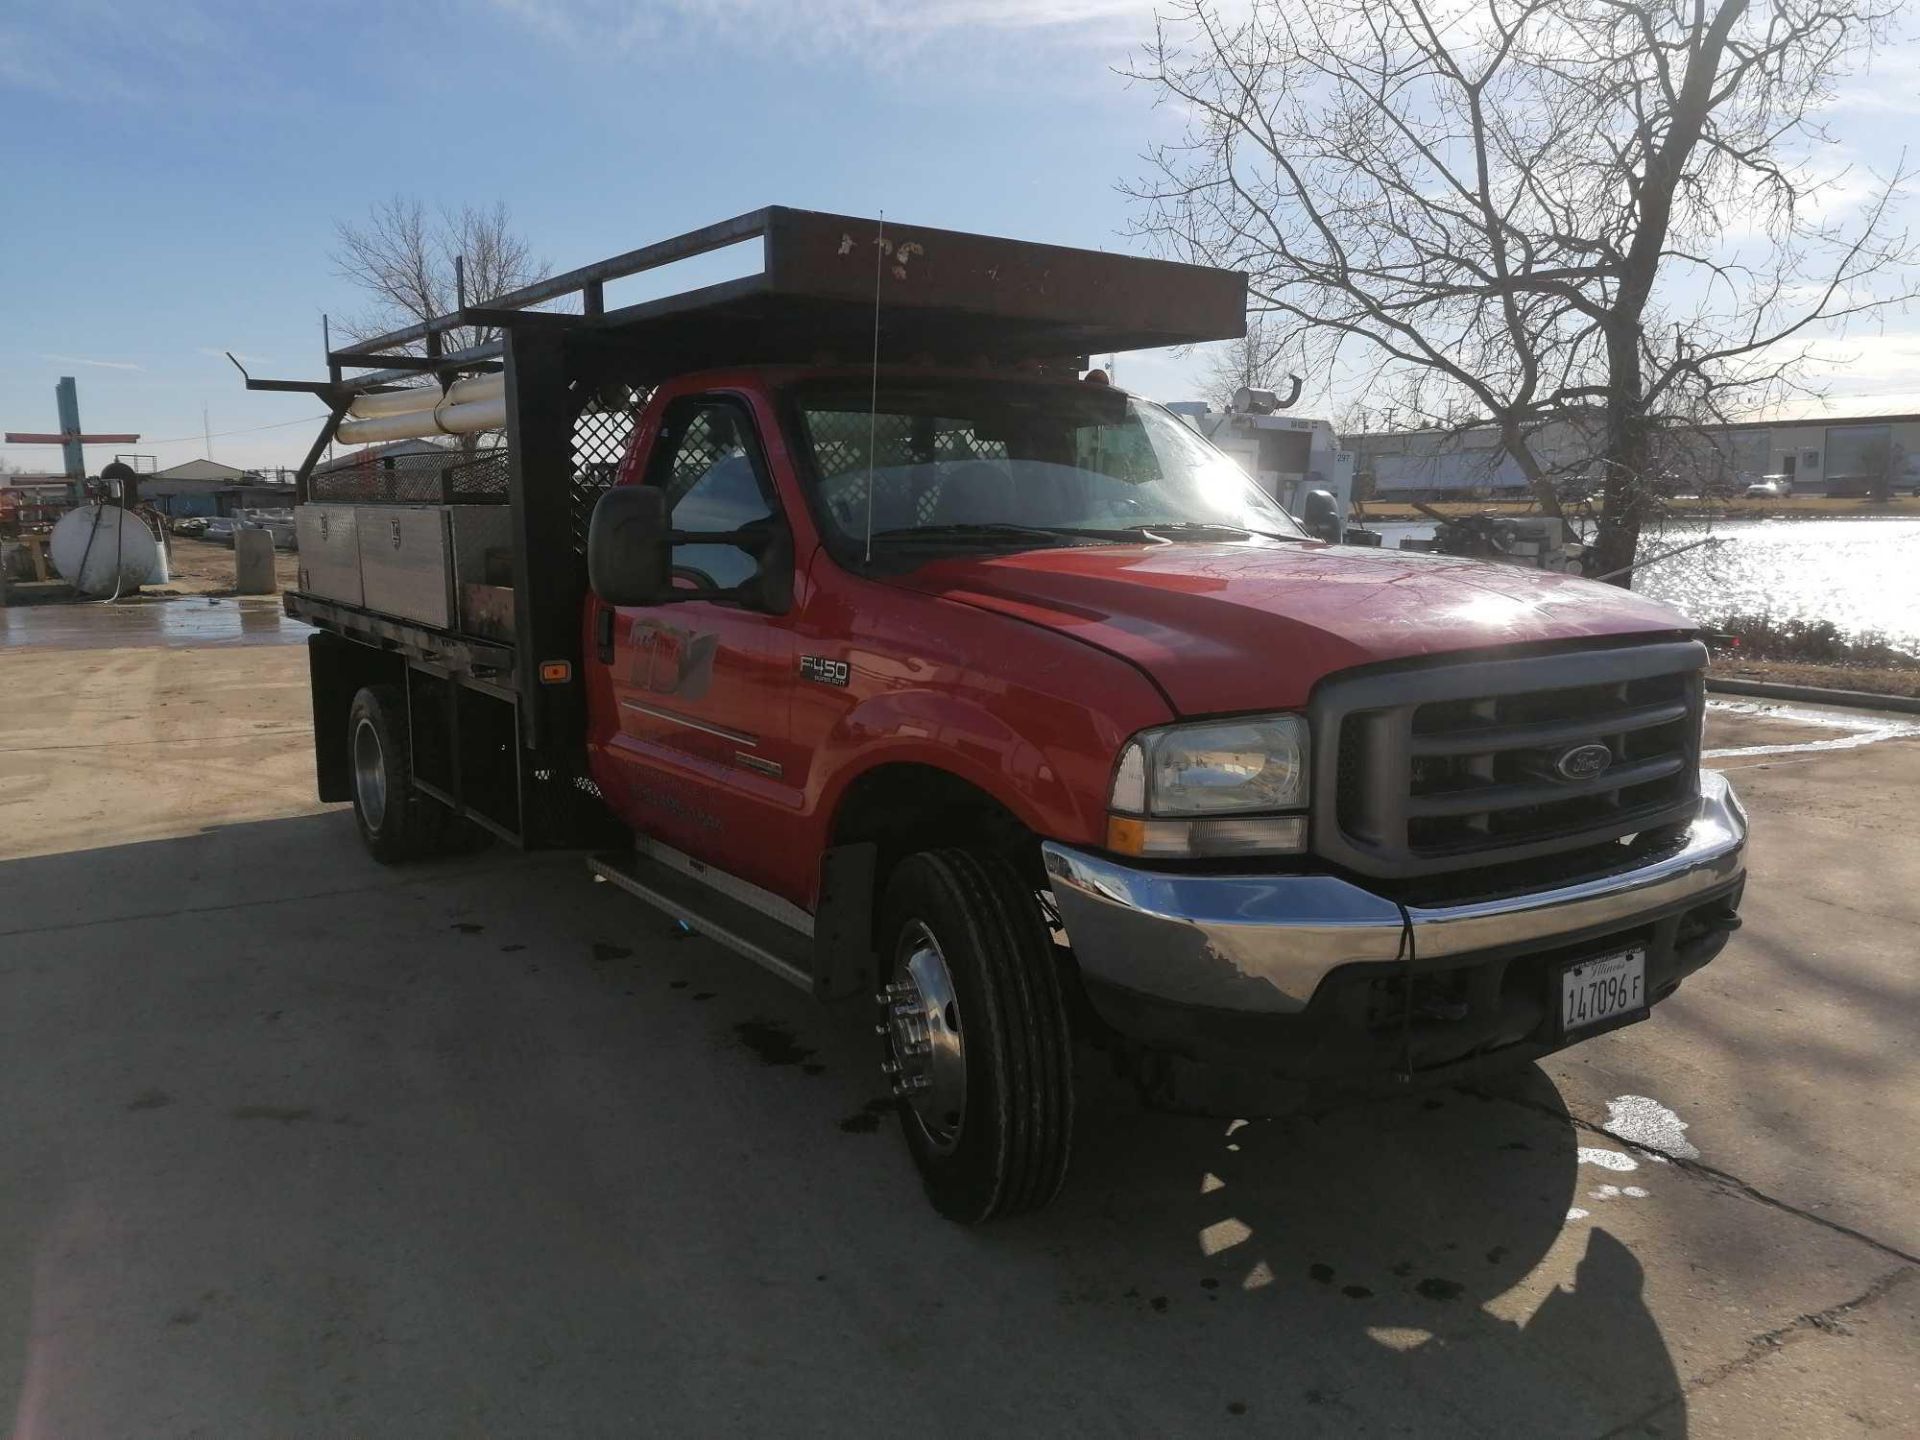 2003 Ford F-450 XL Super Duty Flatbed Truck, VIN # 1FDXF46P34EB87876, 191869 Miles, Dually Truck - Image 2 of 26